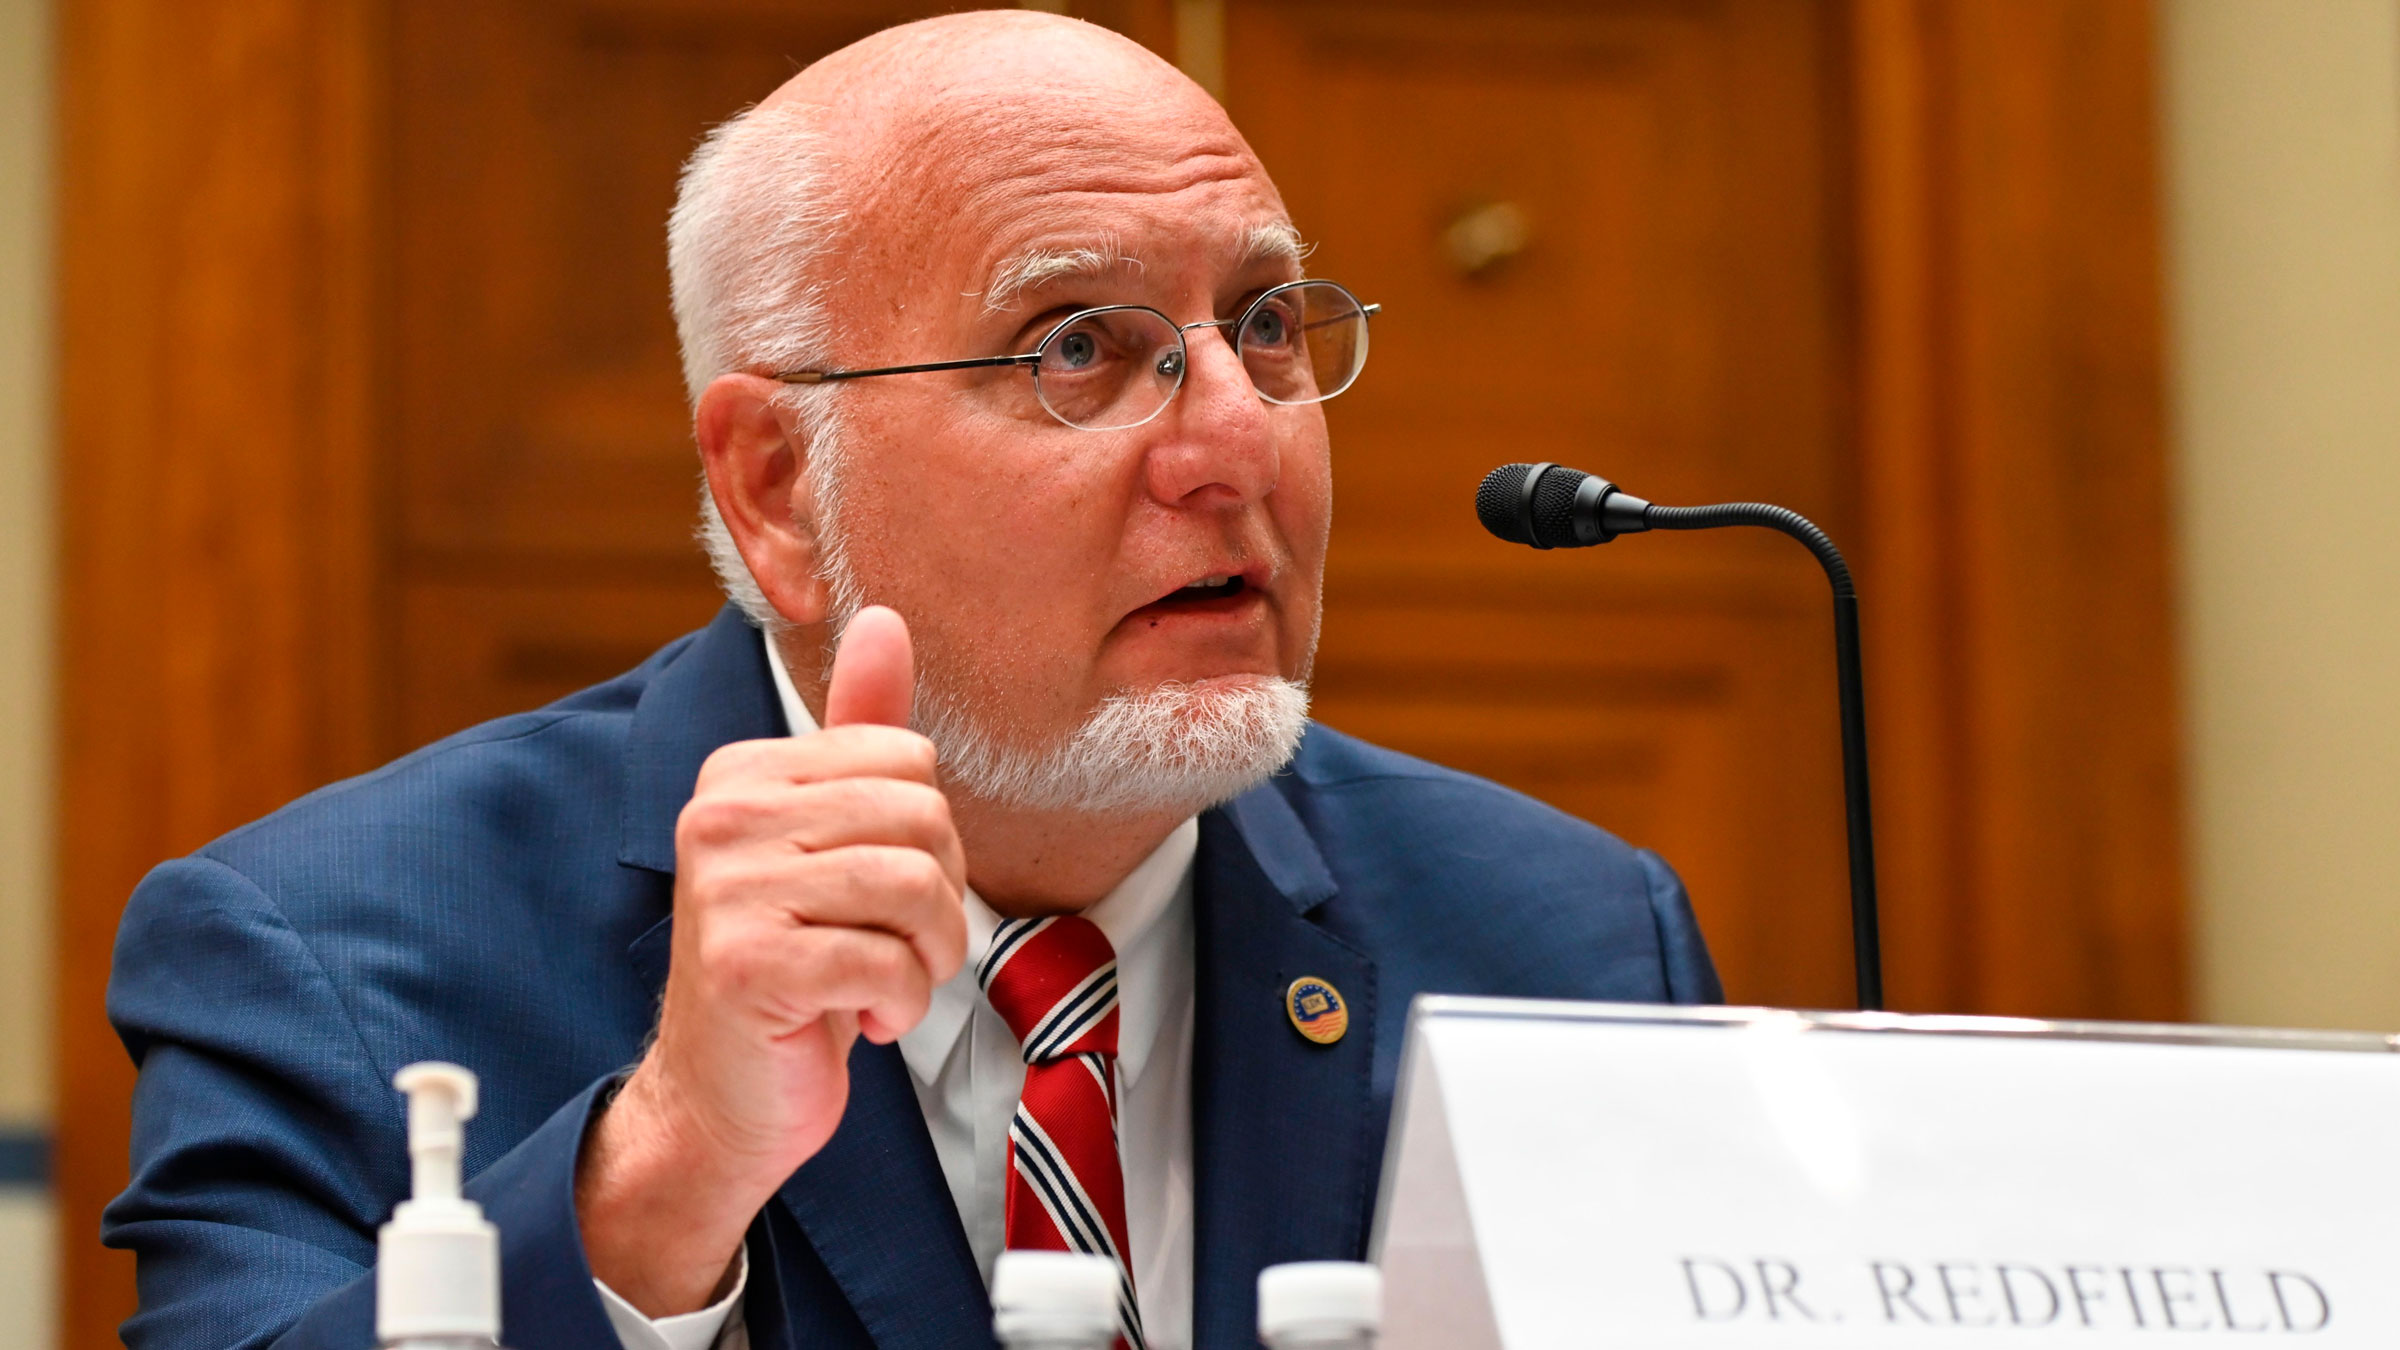 Dr. Robert Redfield, director of the Centers for Disease Control and Prevention, speaks to a House subcommittee in July.